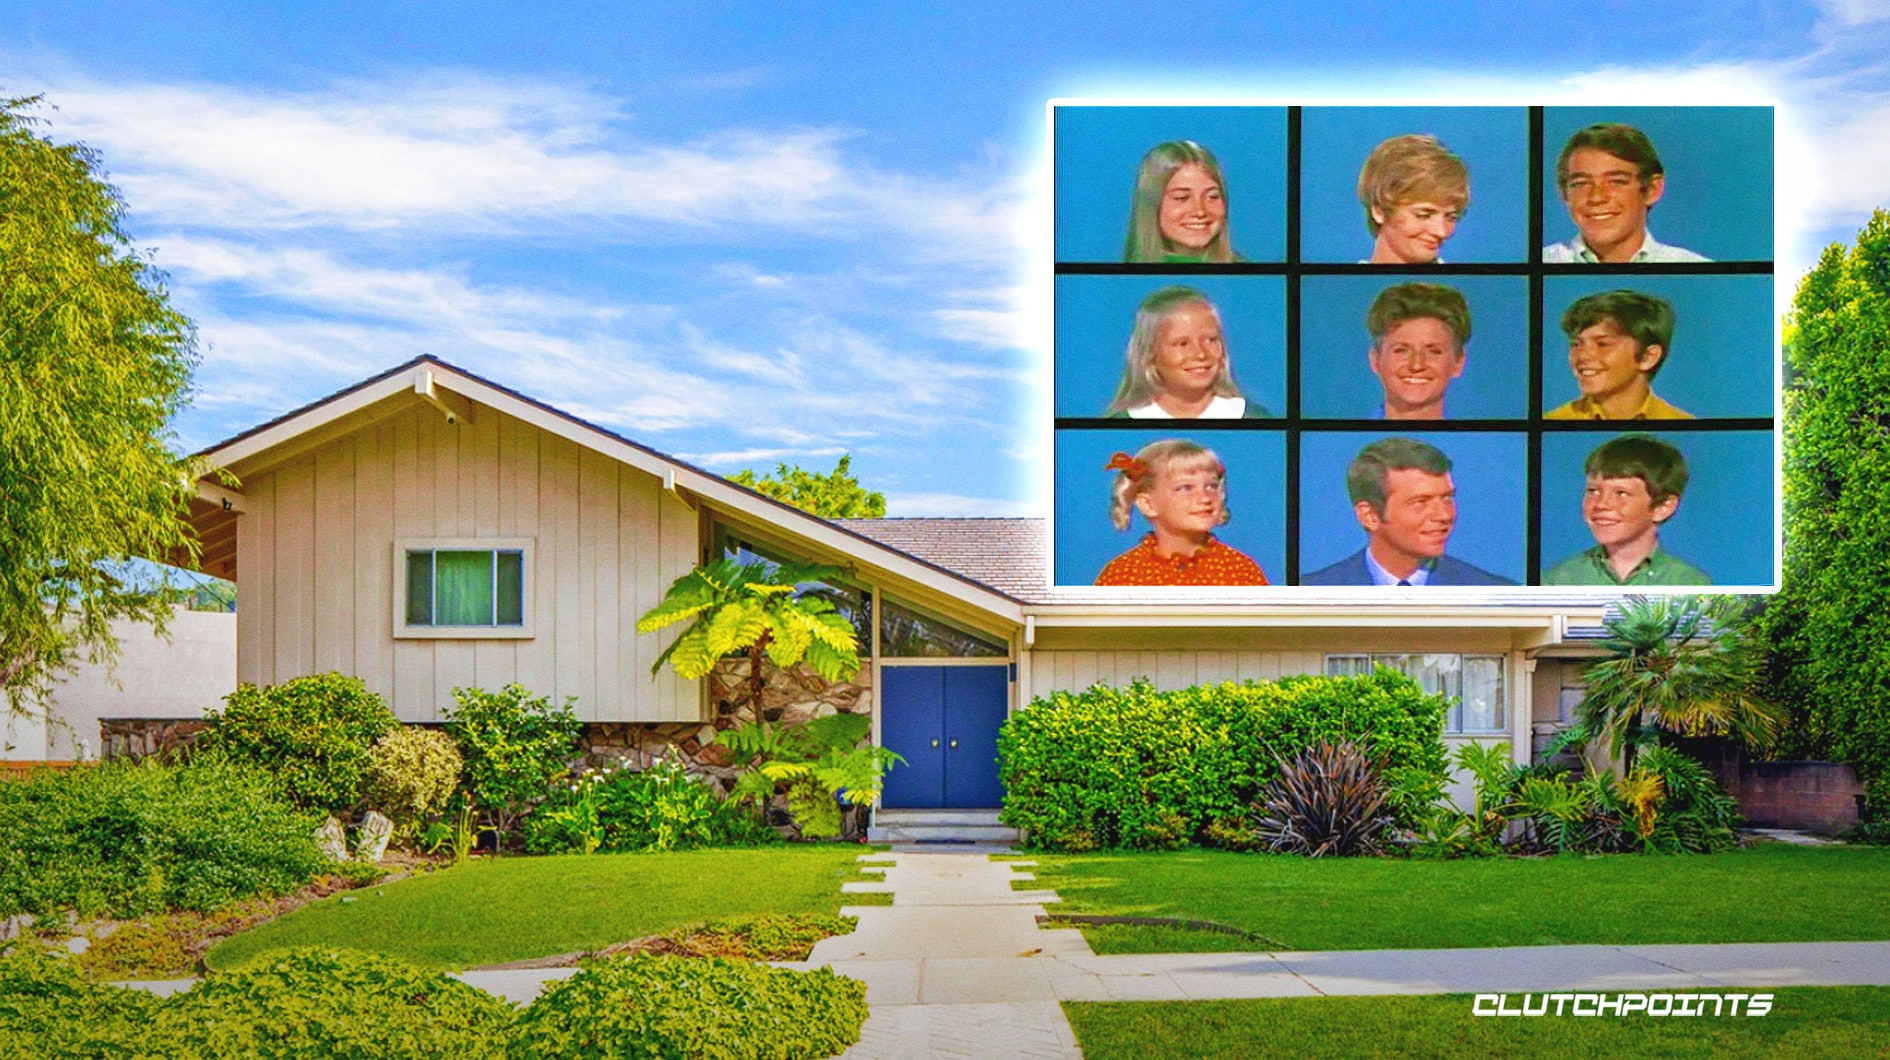 Renovated Brady Bunch home up for sale at 5.5M